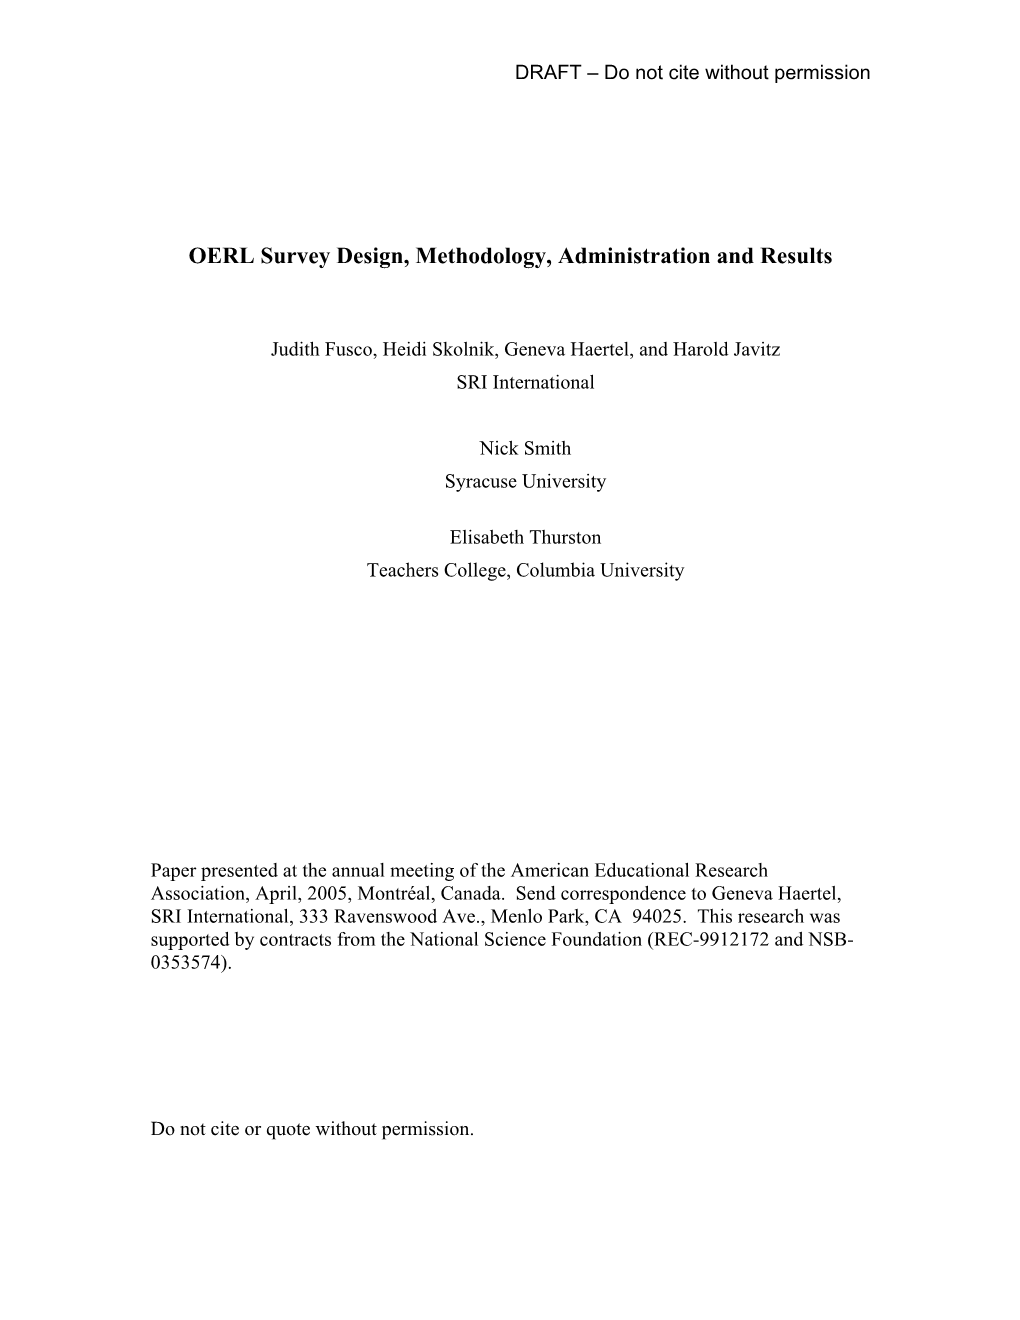 OERL Survey Design, Methodology, Administration and Results